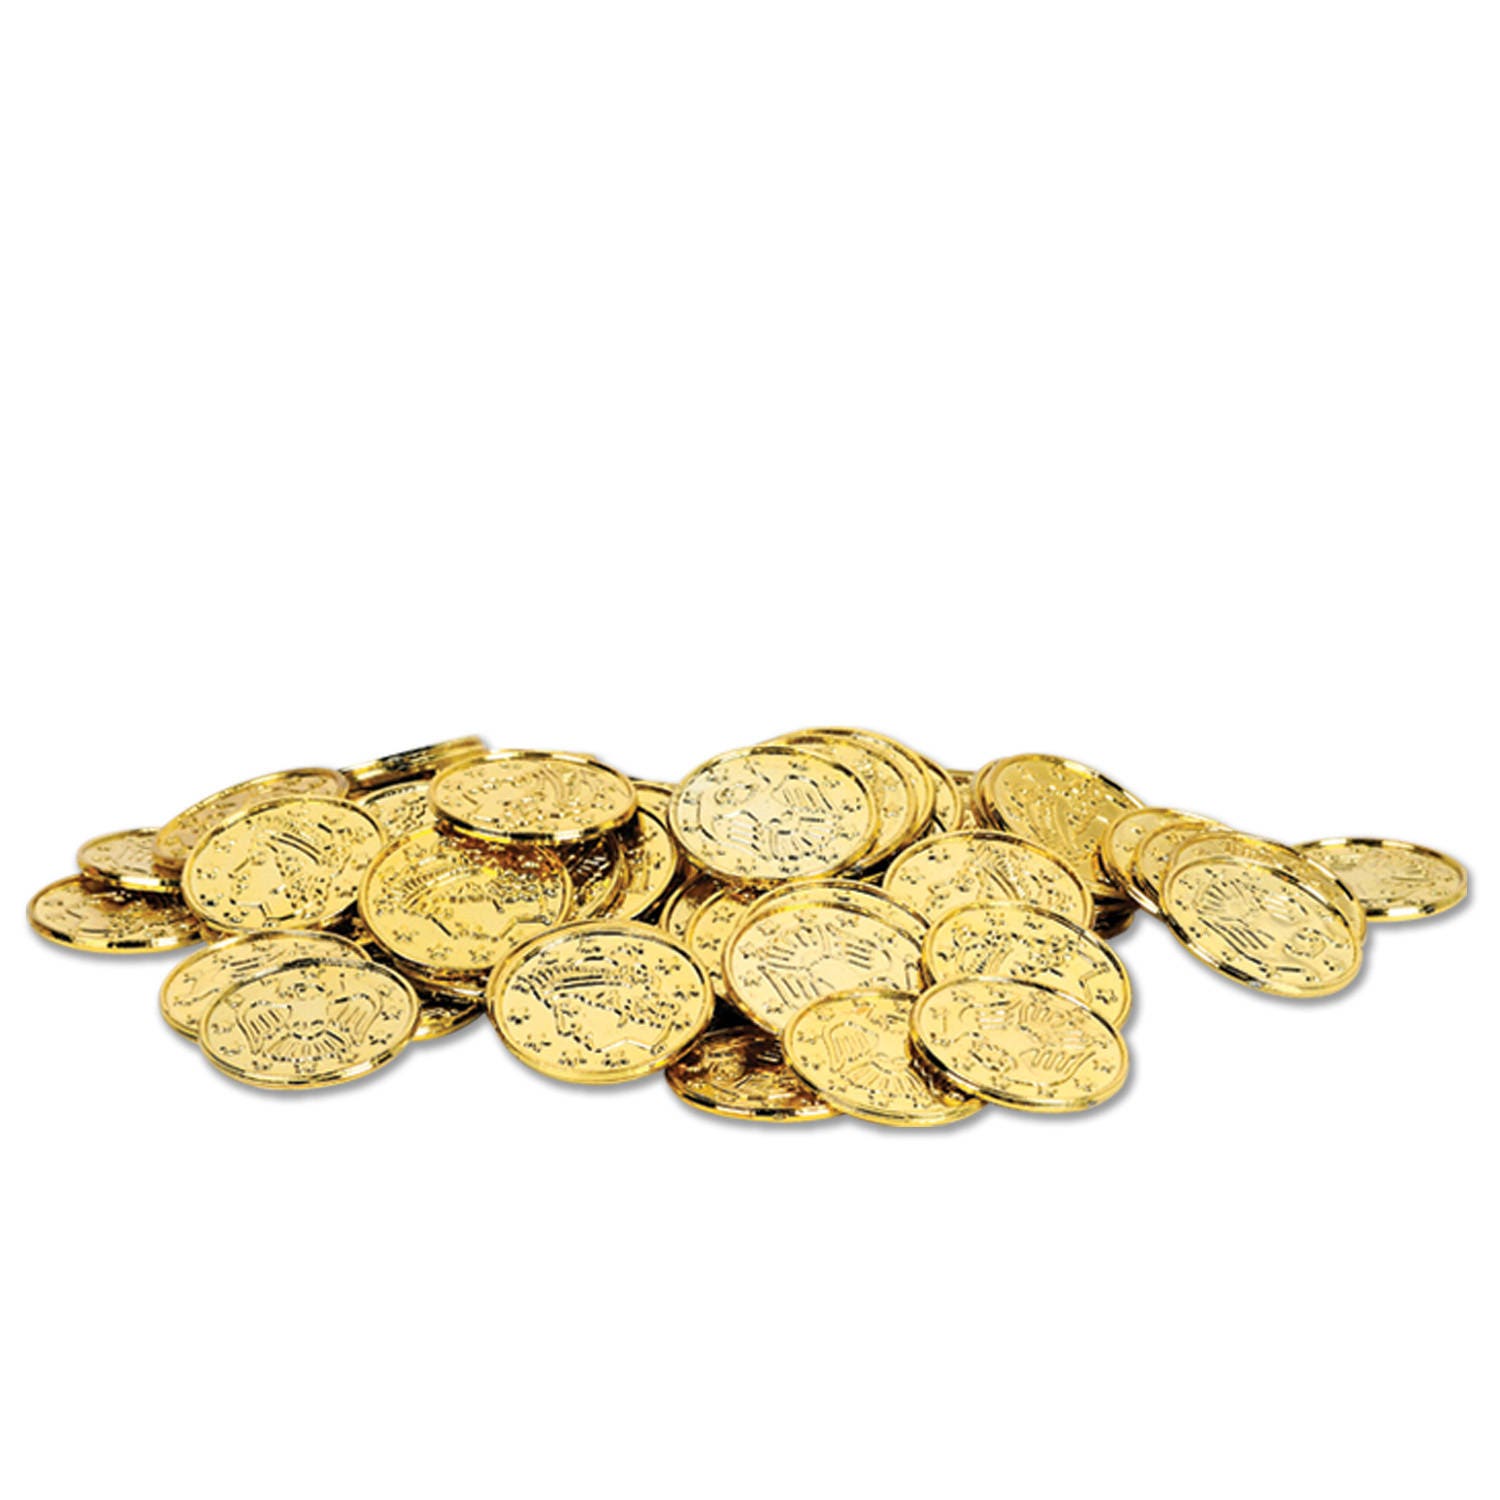 10 Metal Gold Colored Doubloon Props Pirate Treasure Coins 